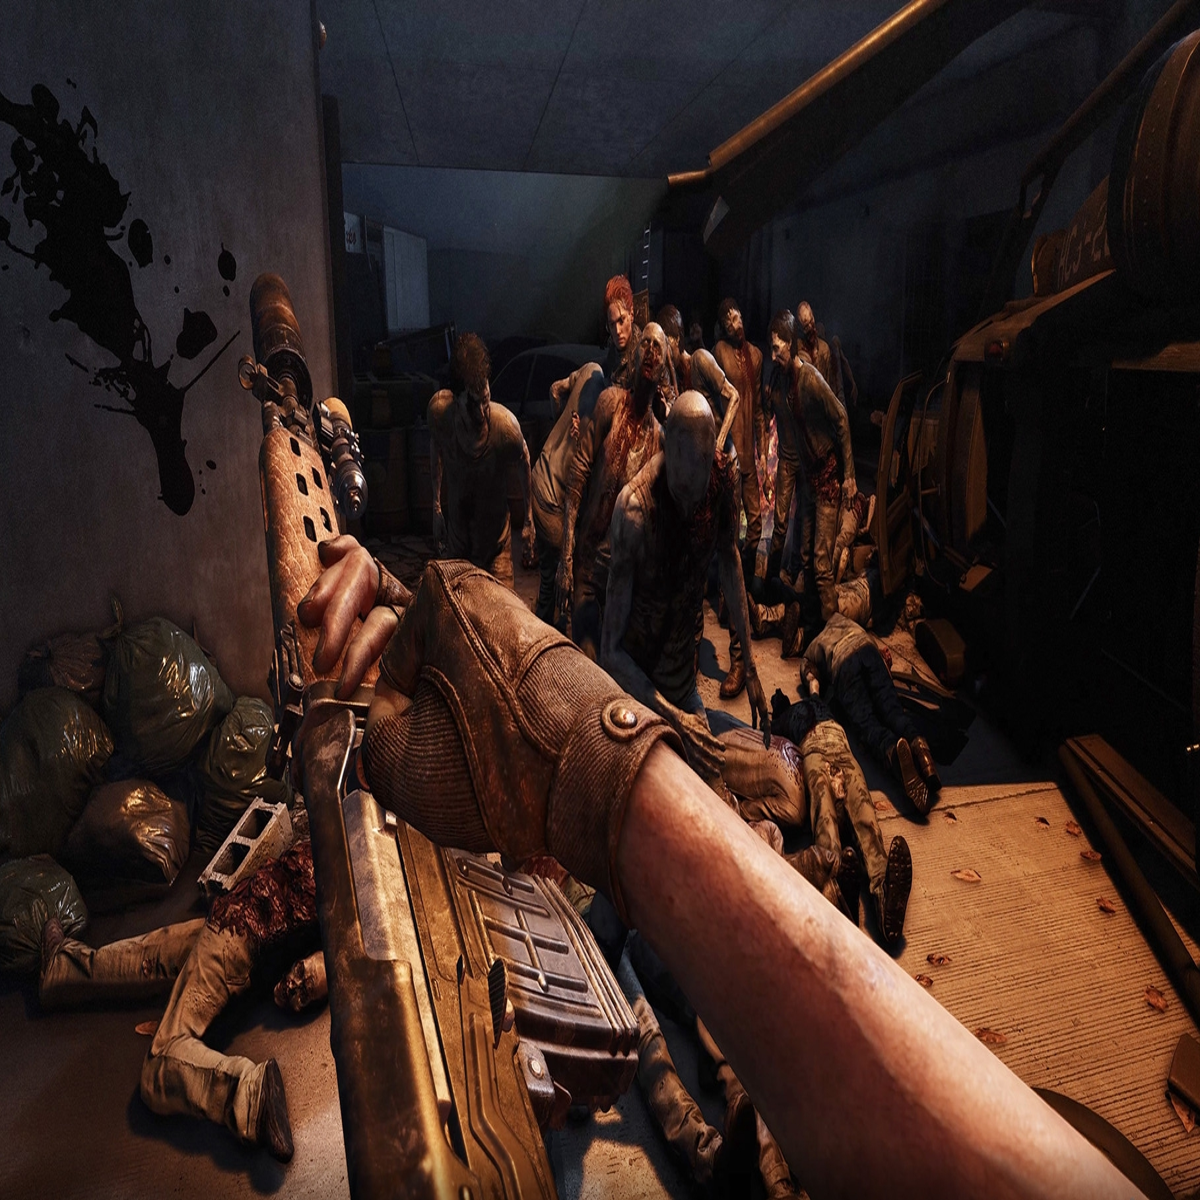 Boy, Overkill's 'The Walking Dead' Game Is Not Looking Great